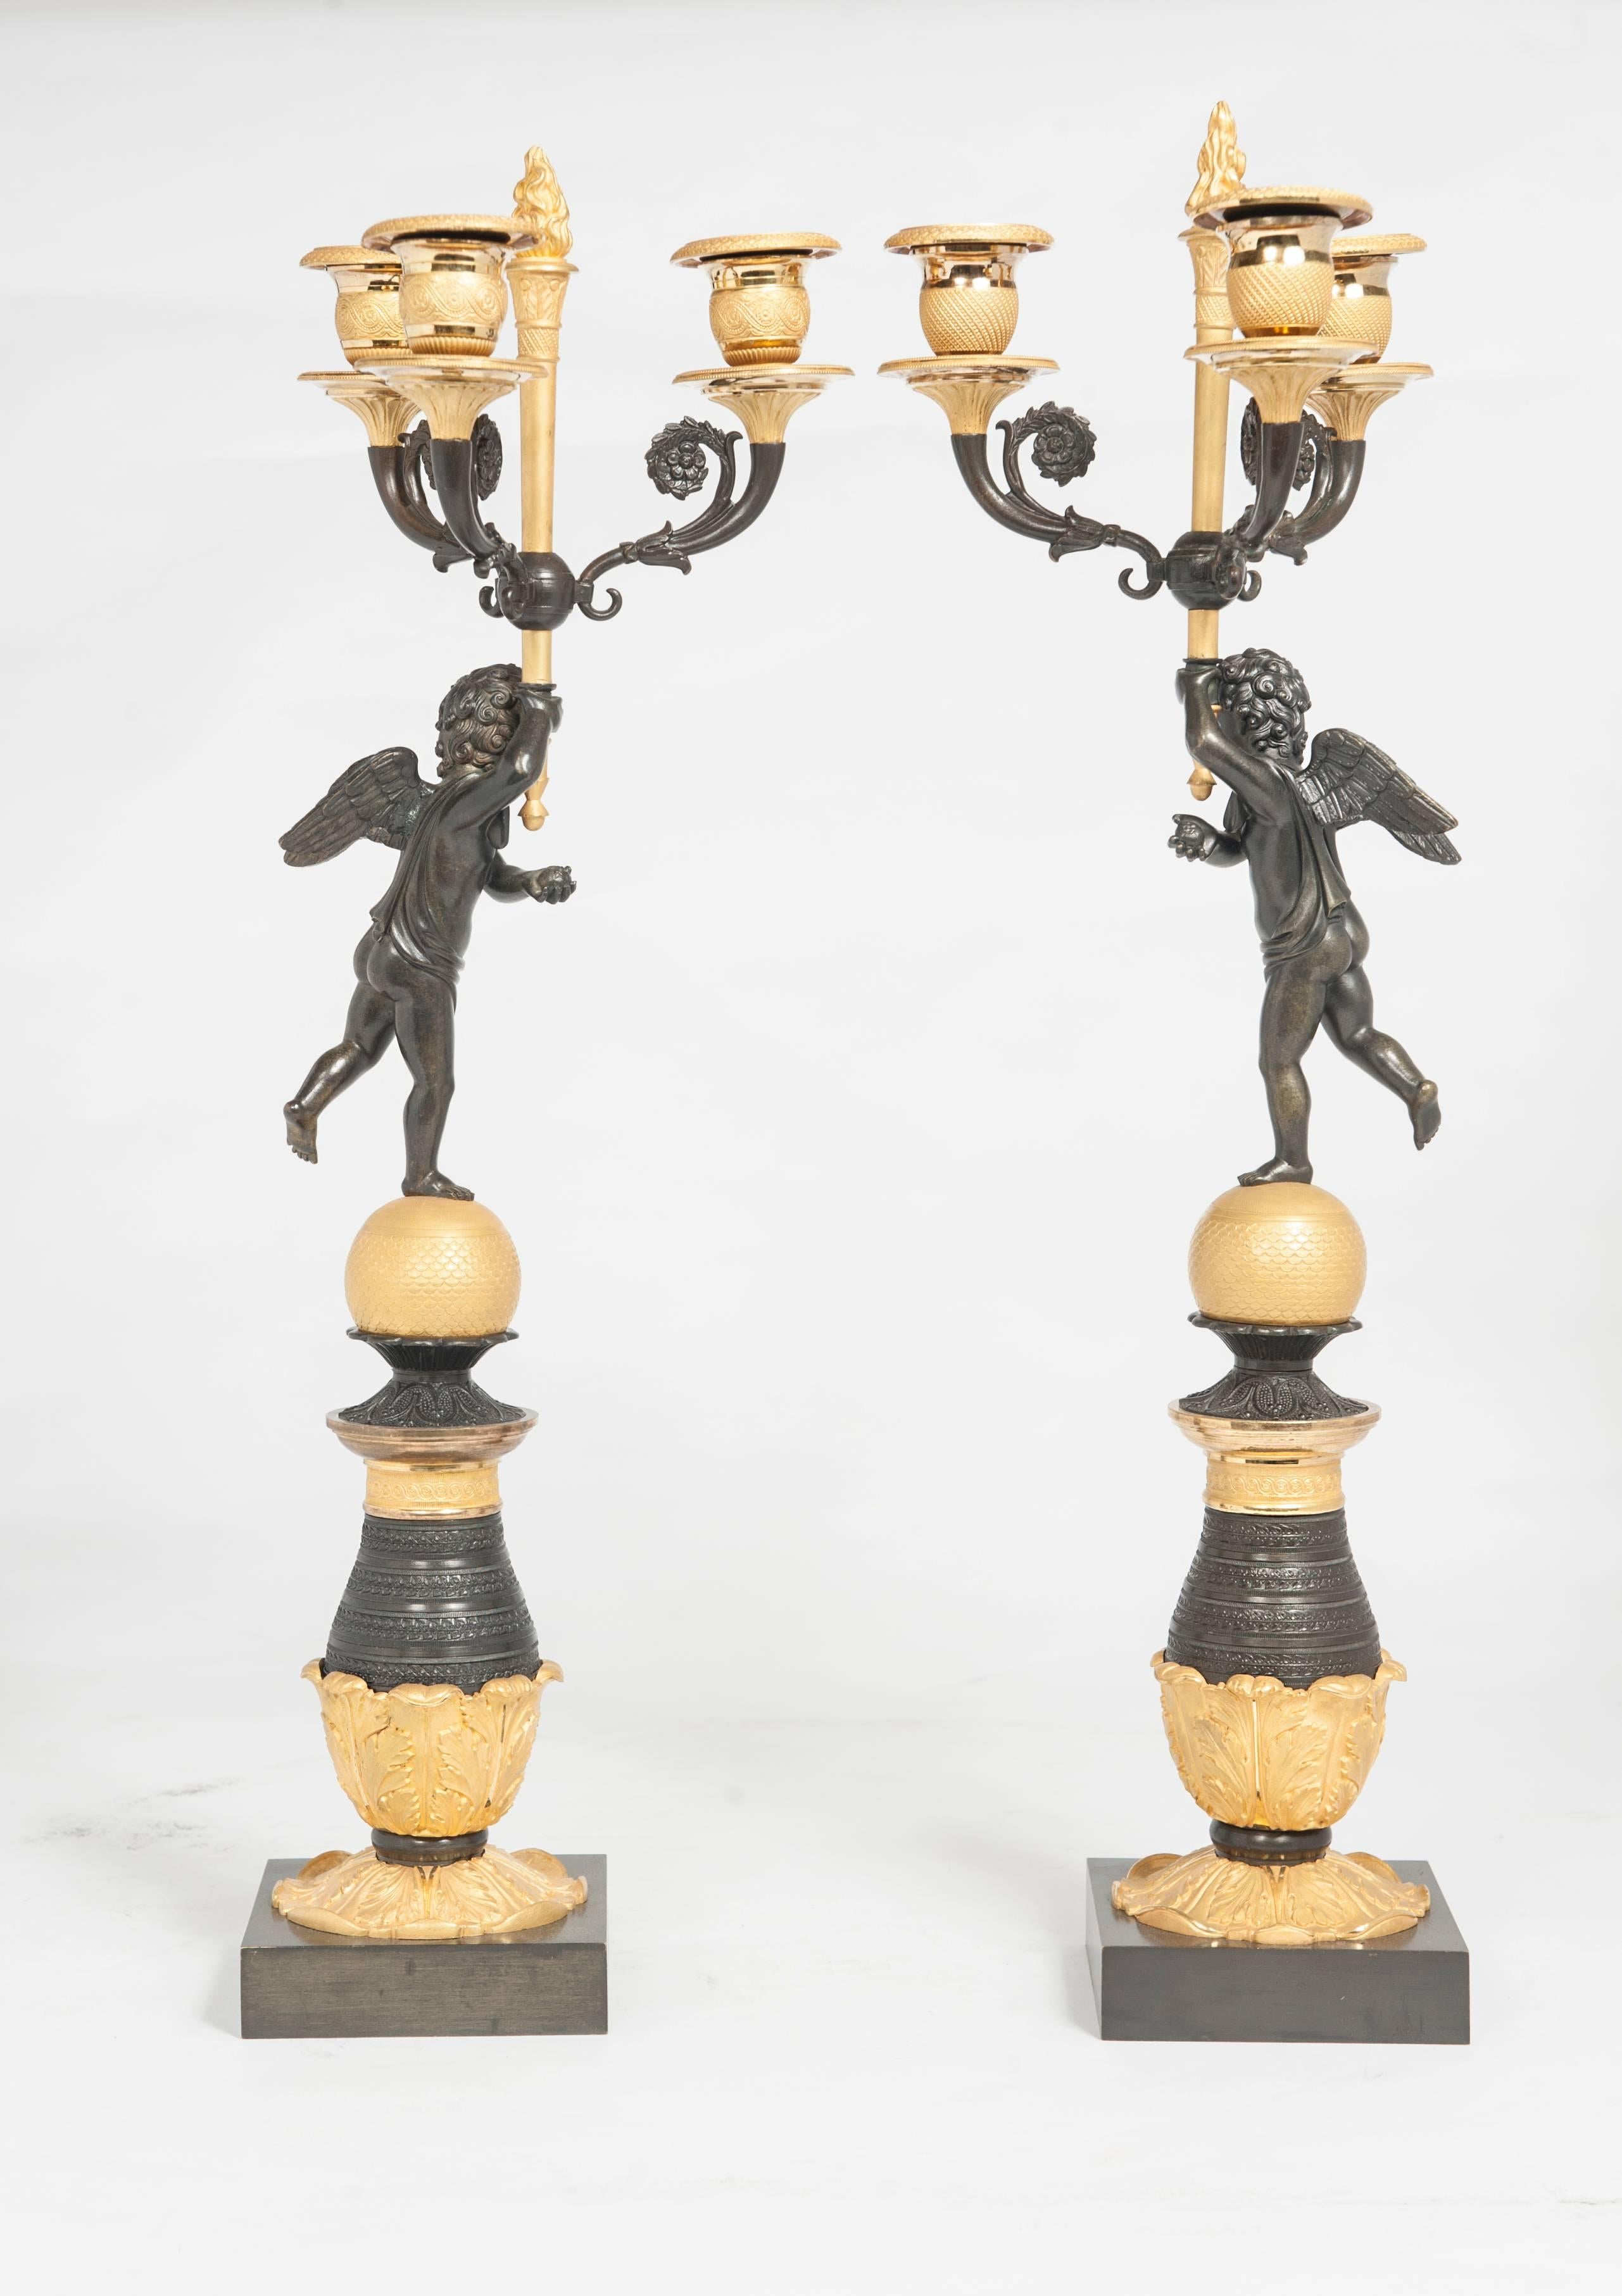 A good pair of Empire/Charles X candlesticks, circa 1830. The nice detailed ormolu and patinated bronzes are from a very good quality.